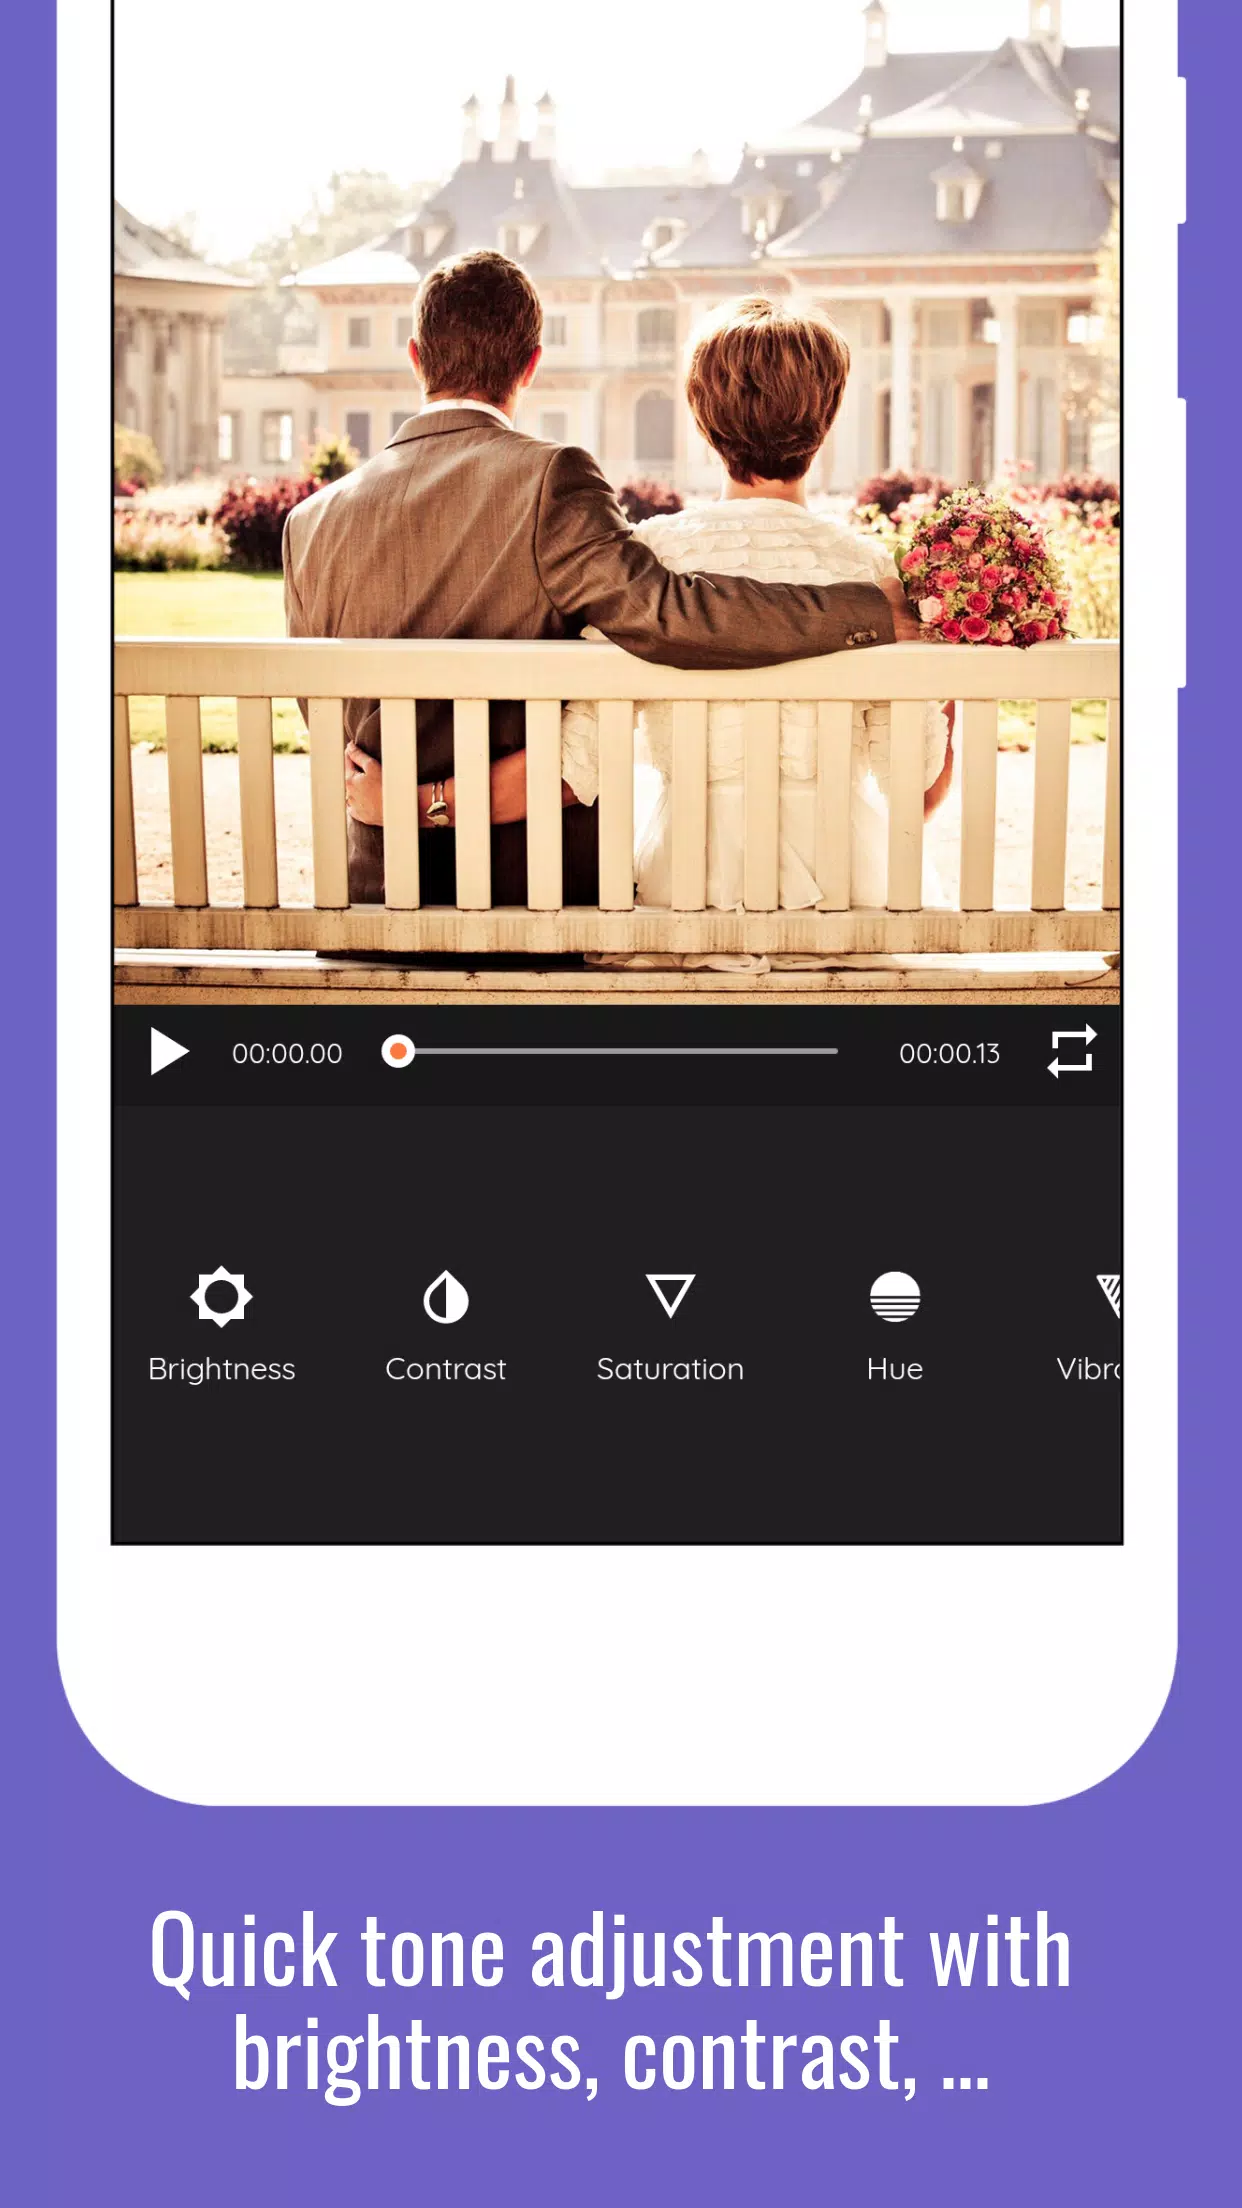 GIF Maker, GIF Editor APK Download for Android - AndroidFreeware